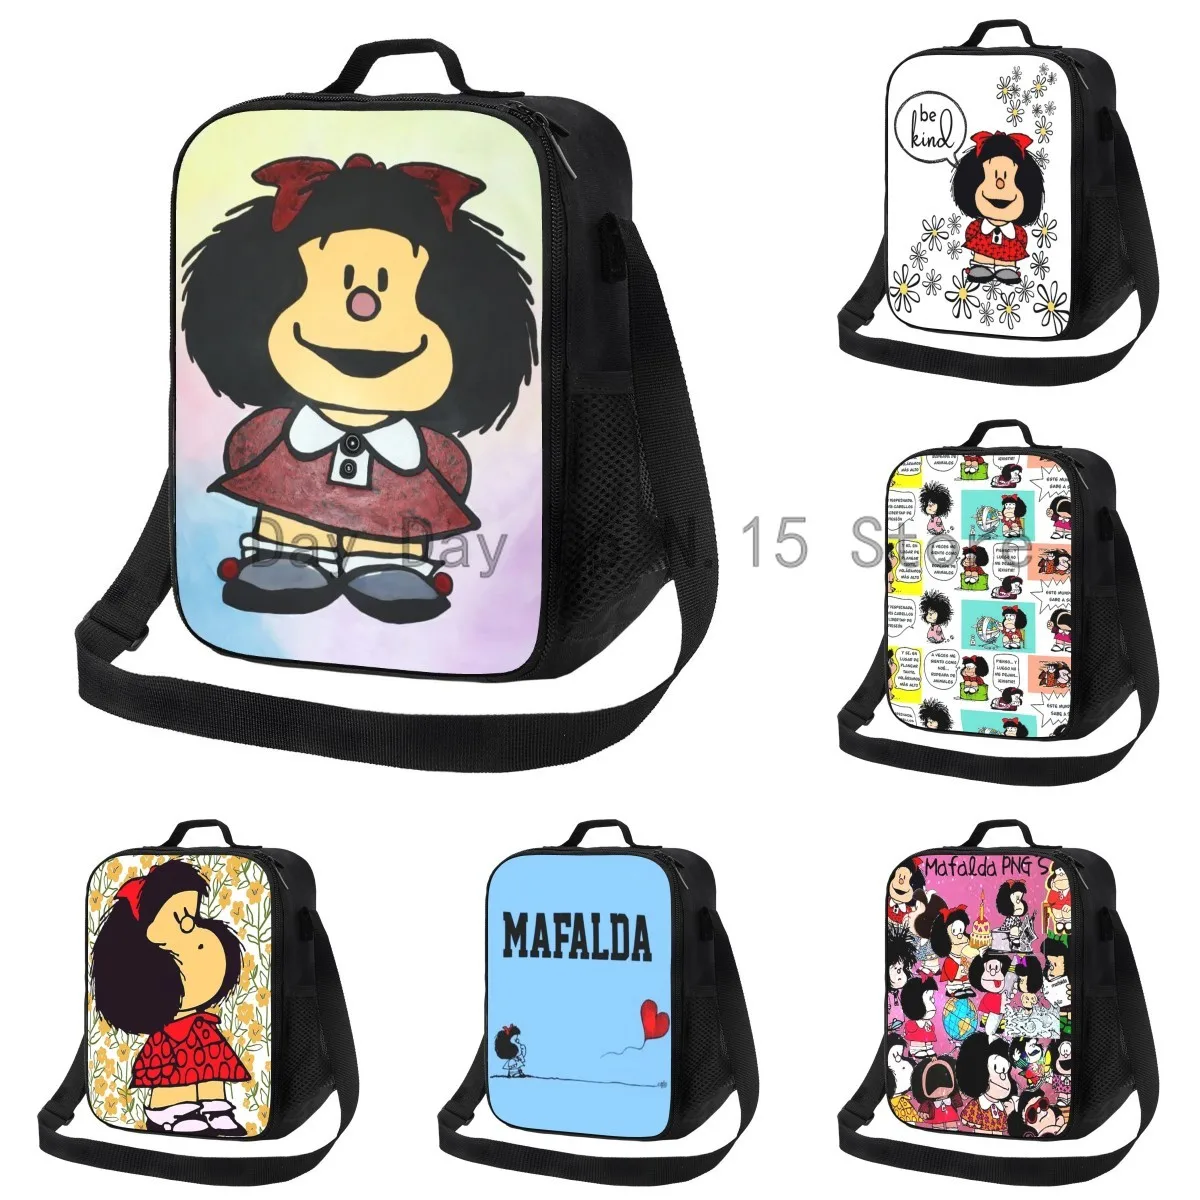 Cartoon Manga Mafalda Portable Lunch Box Women Multifunction Quino Comic Thermal Cooler Food Insulated Lunch Bag Office Work kitsune fox lunch box multifunction thermal cooler food insulated lunch bag for women school work picnic reusable tote container